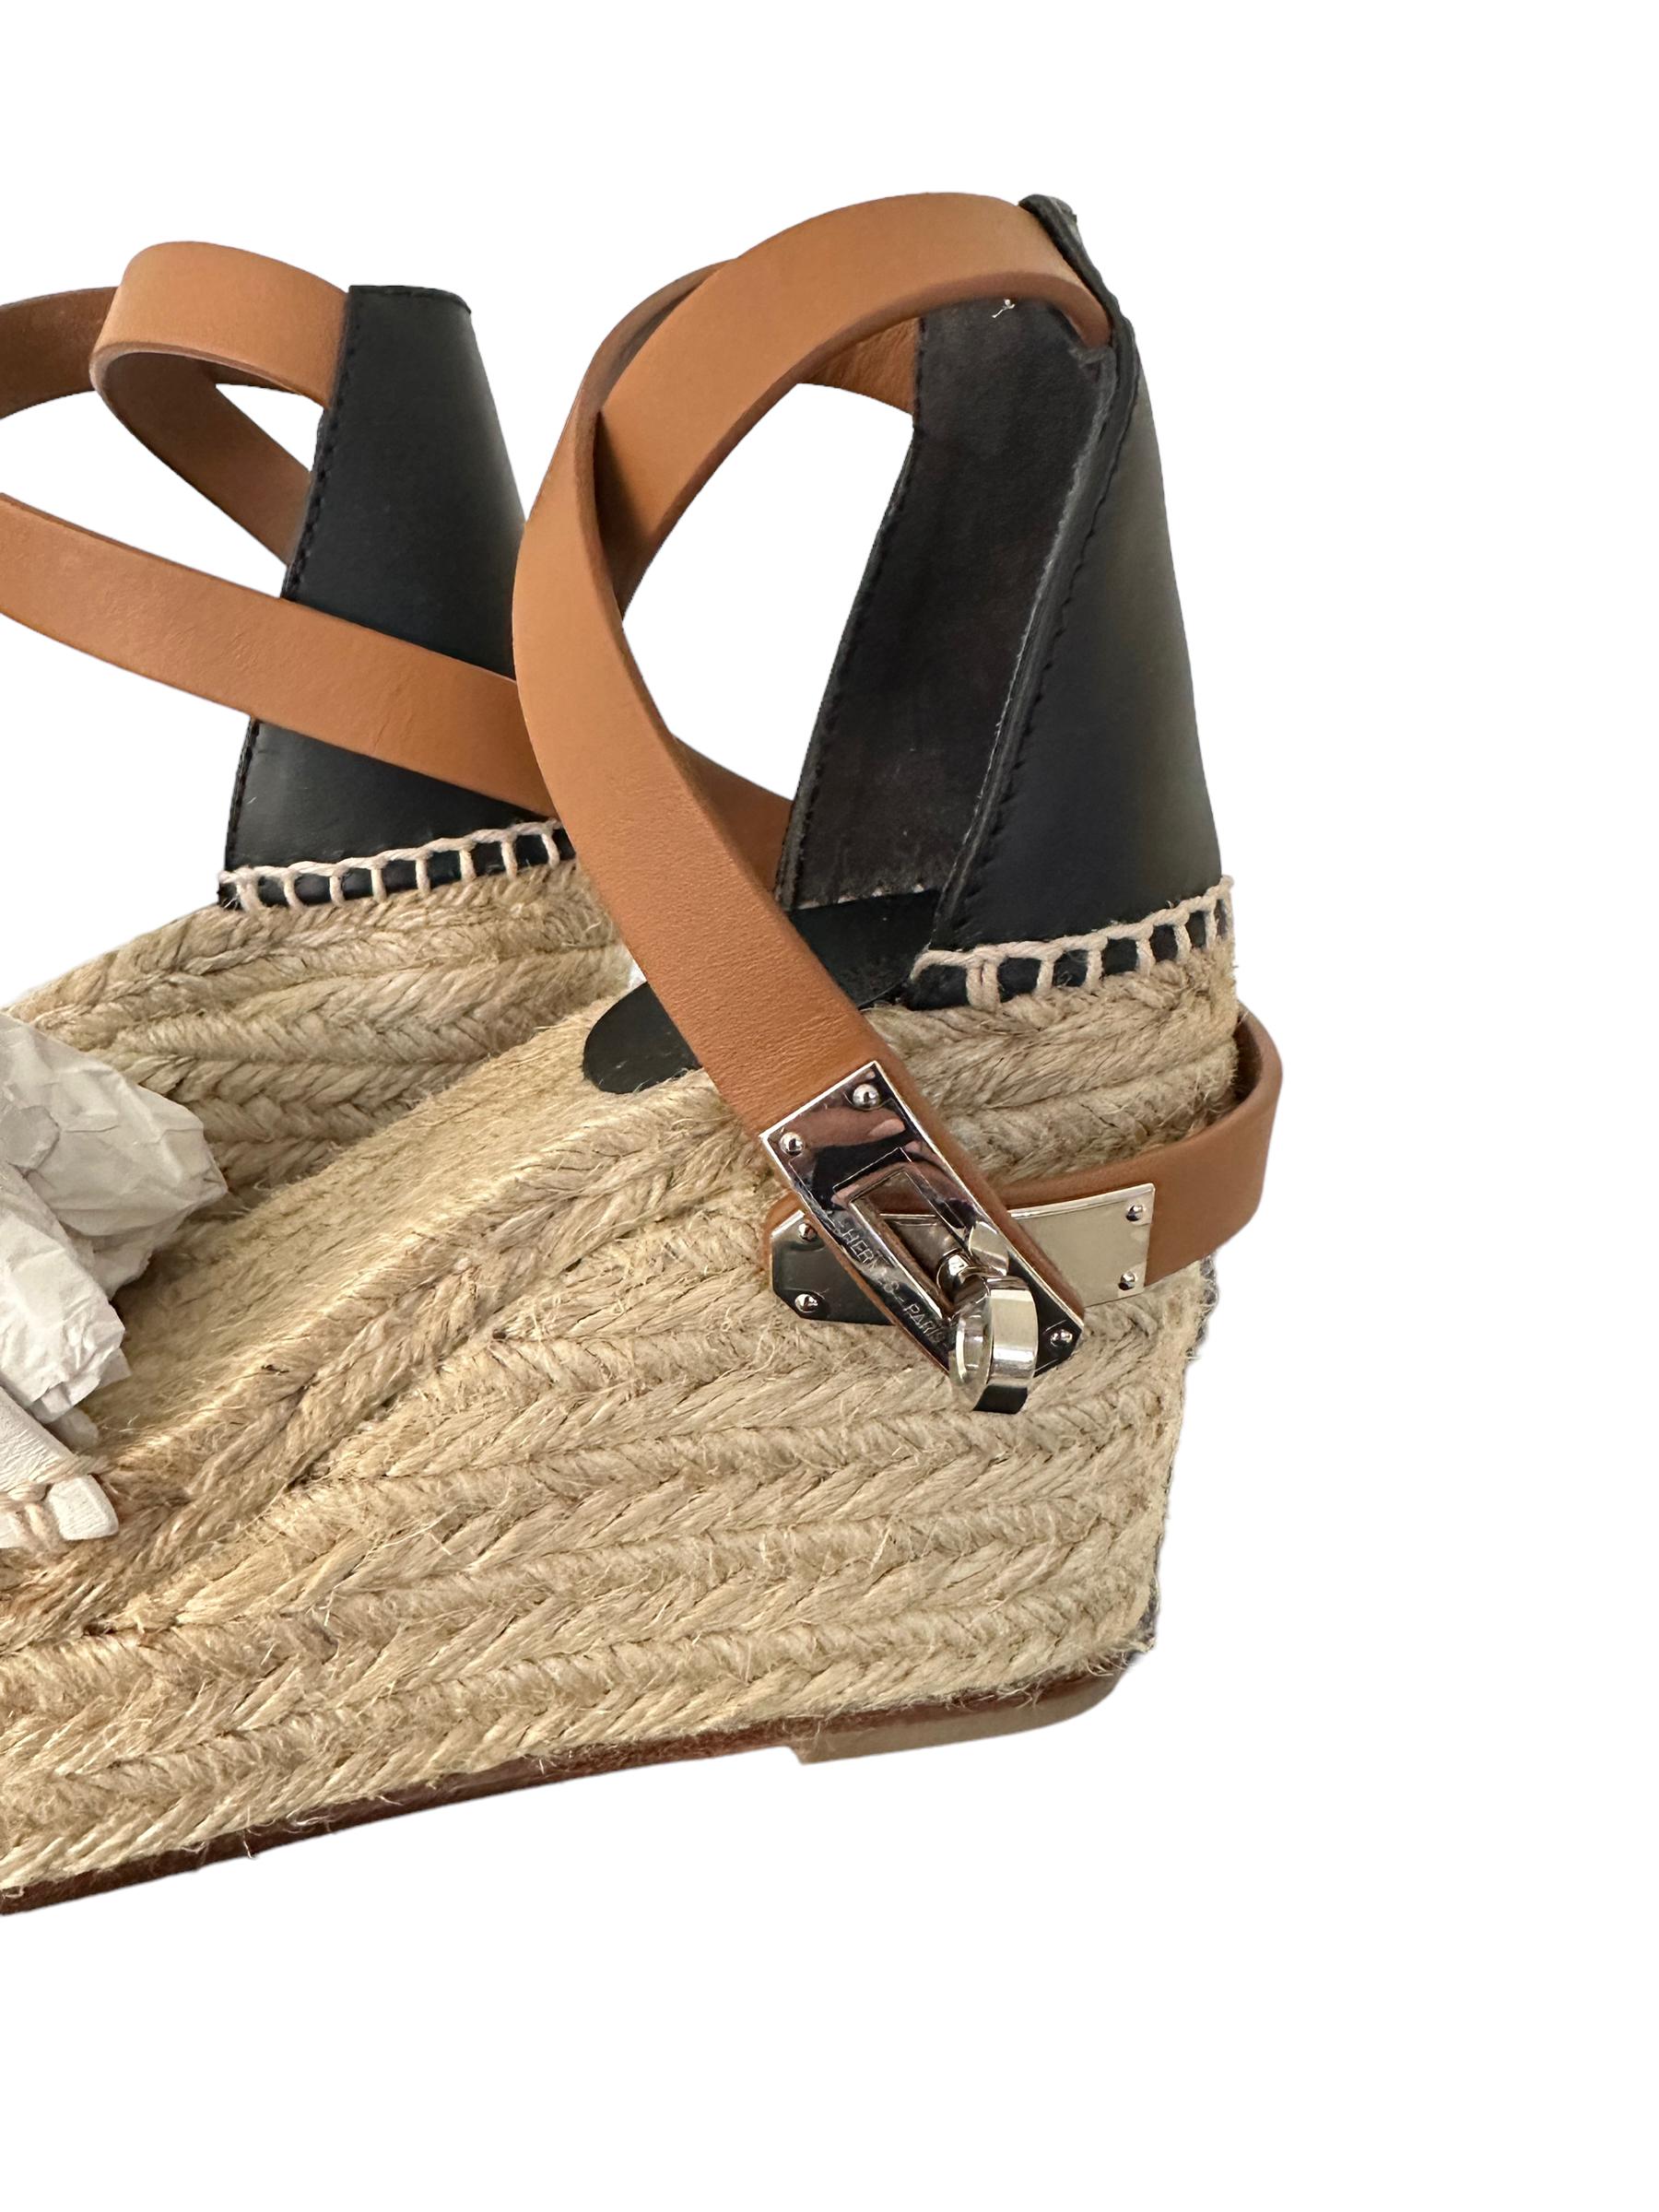 Women's or Men's HERMES Tipoli Espadrille Wedge Sandals Size 35 New in Box